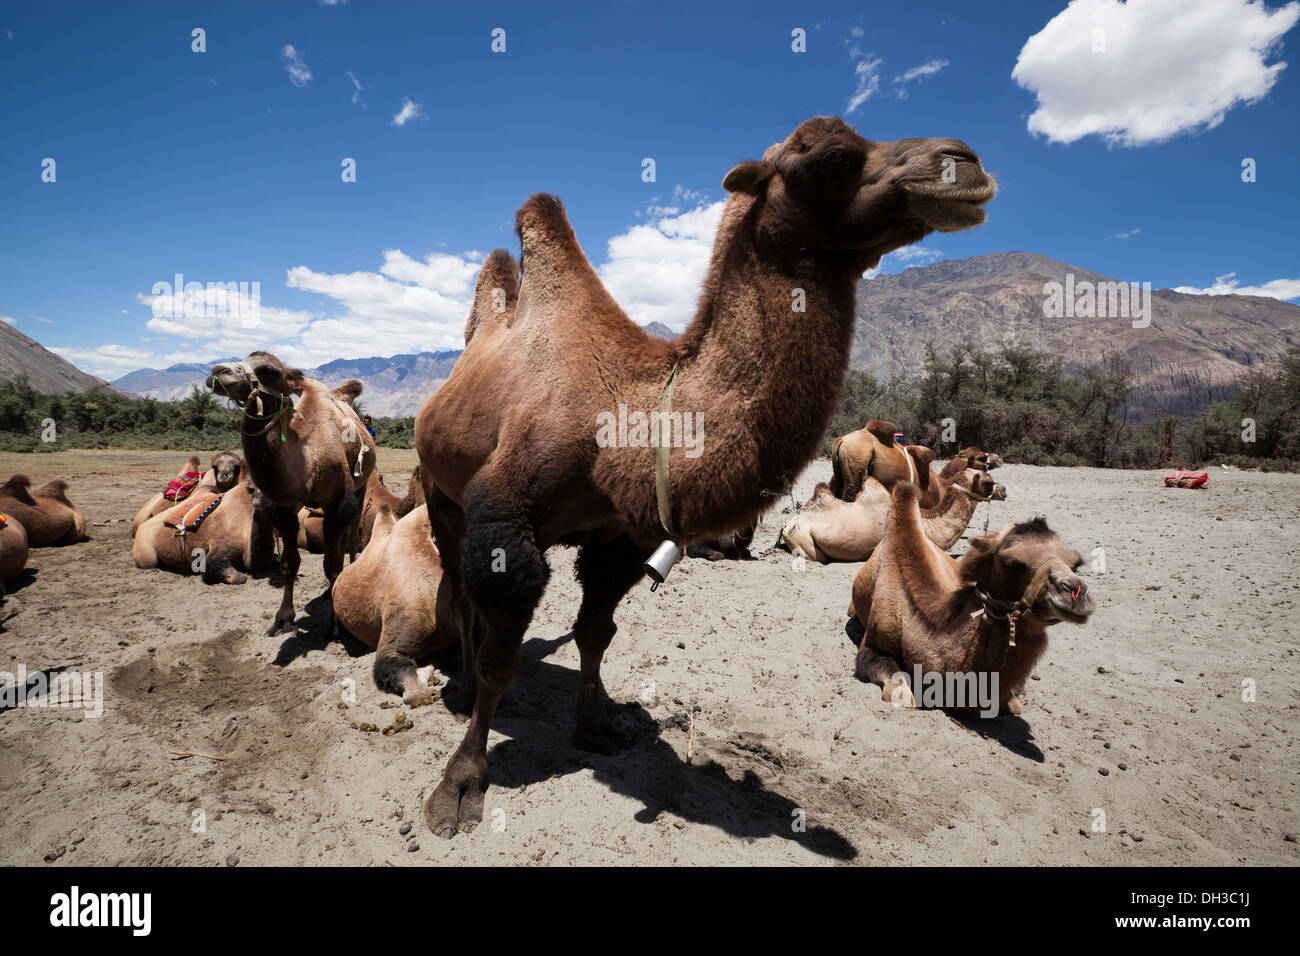 Two humped Bactrian camels, Hunder, Nubrah Valley, Ladakh, Northern India Stock Photo